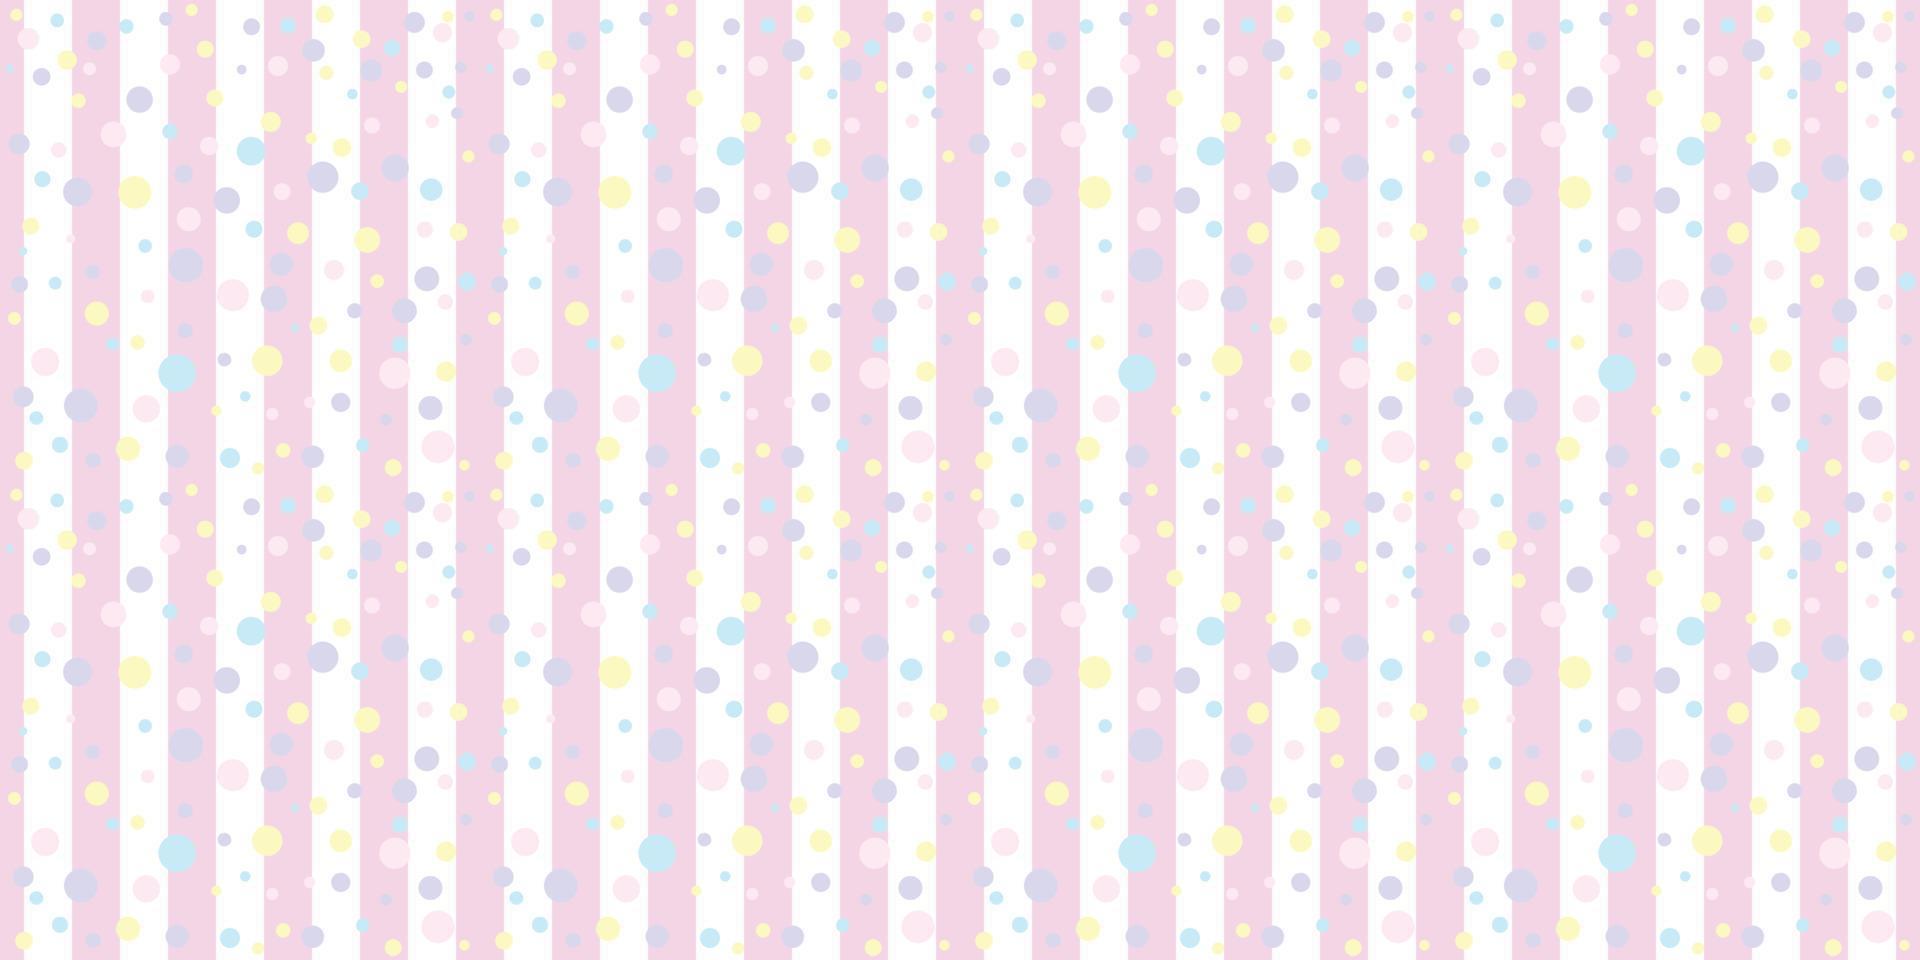 Stripes and dots pastel pink seamless repeat pattern background vector